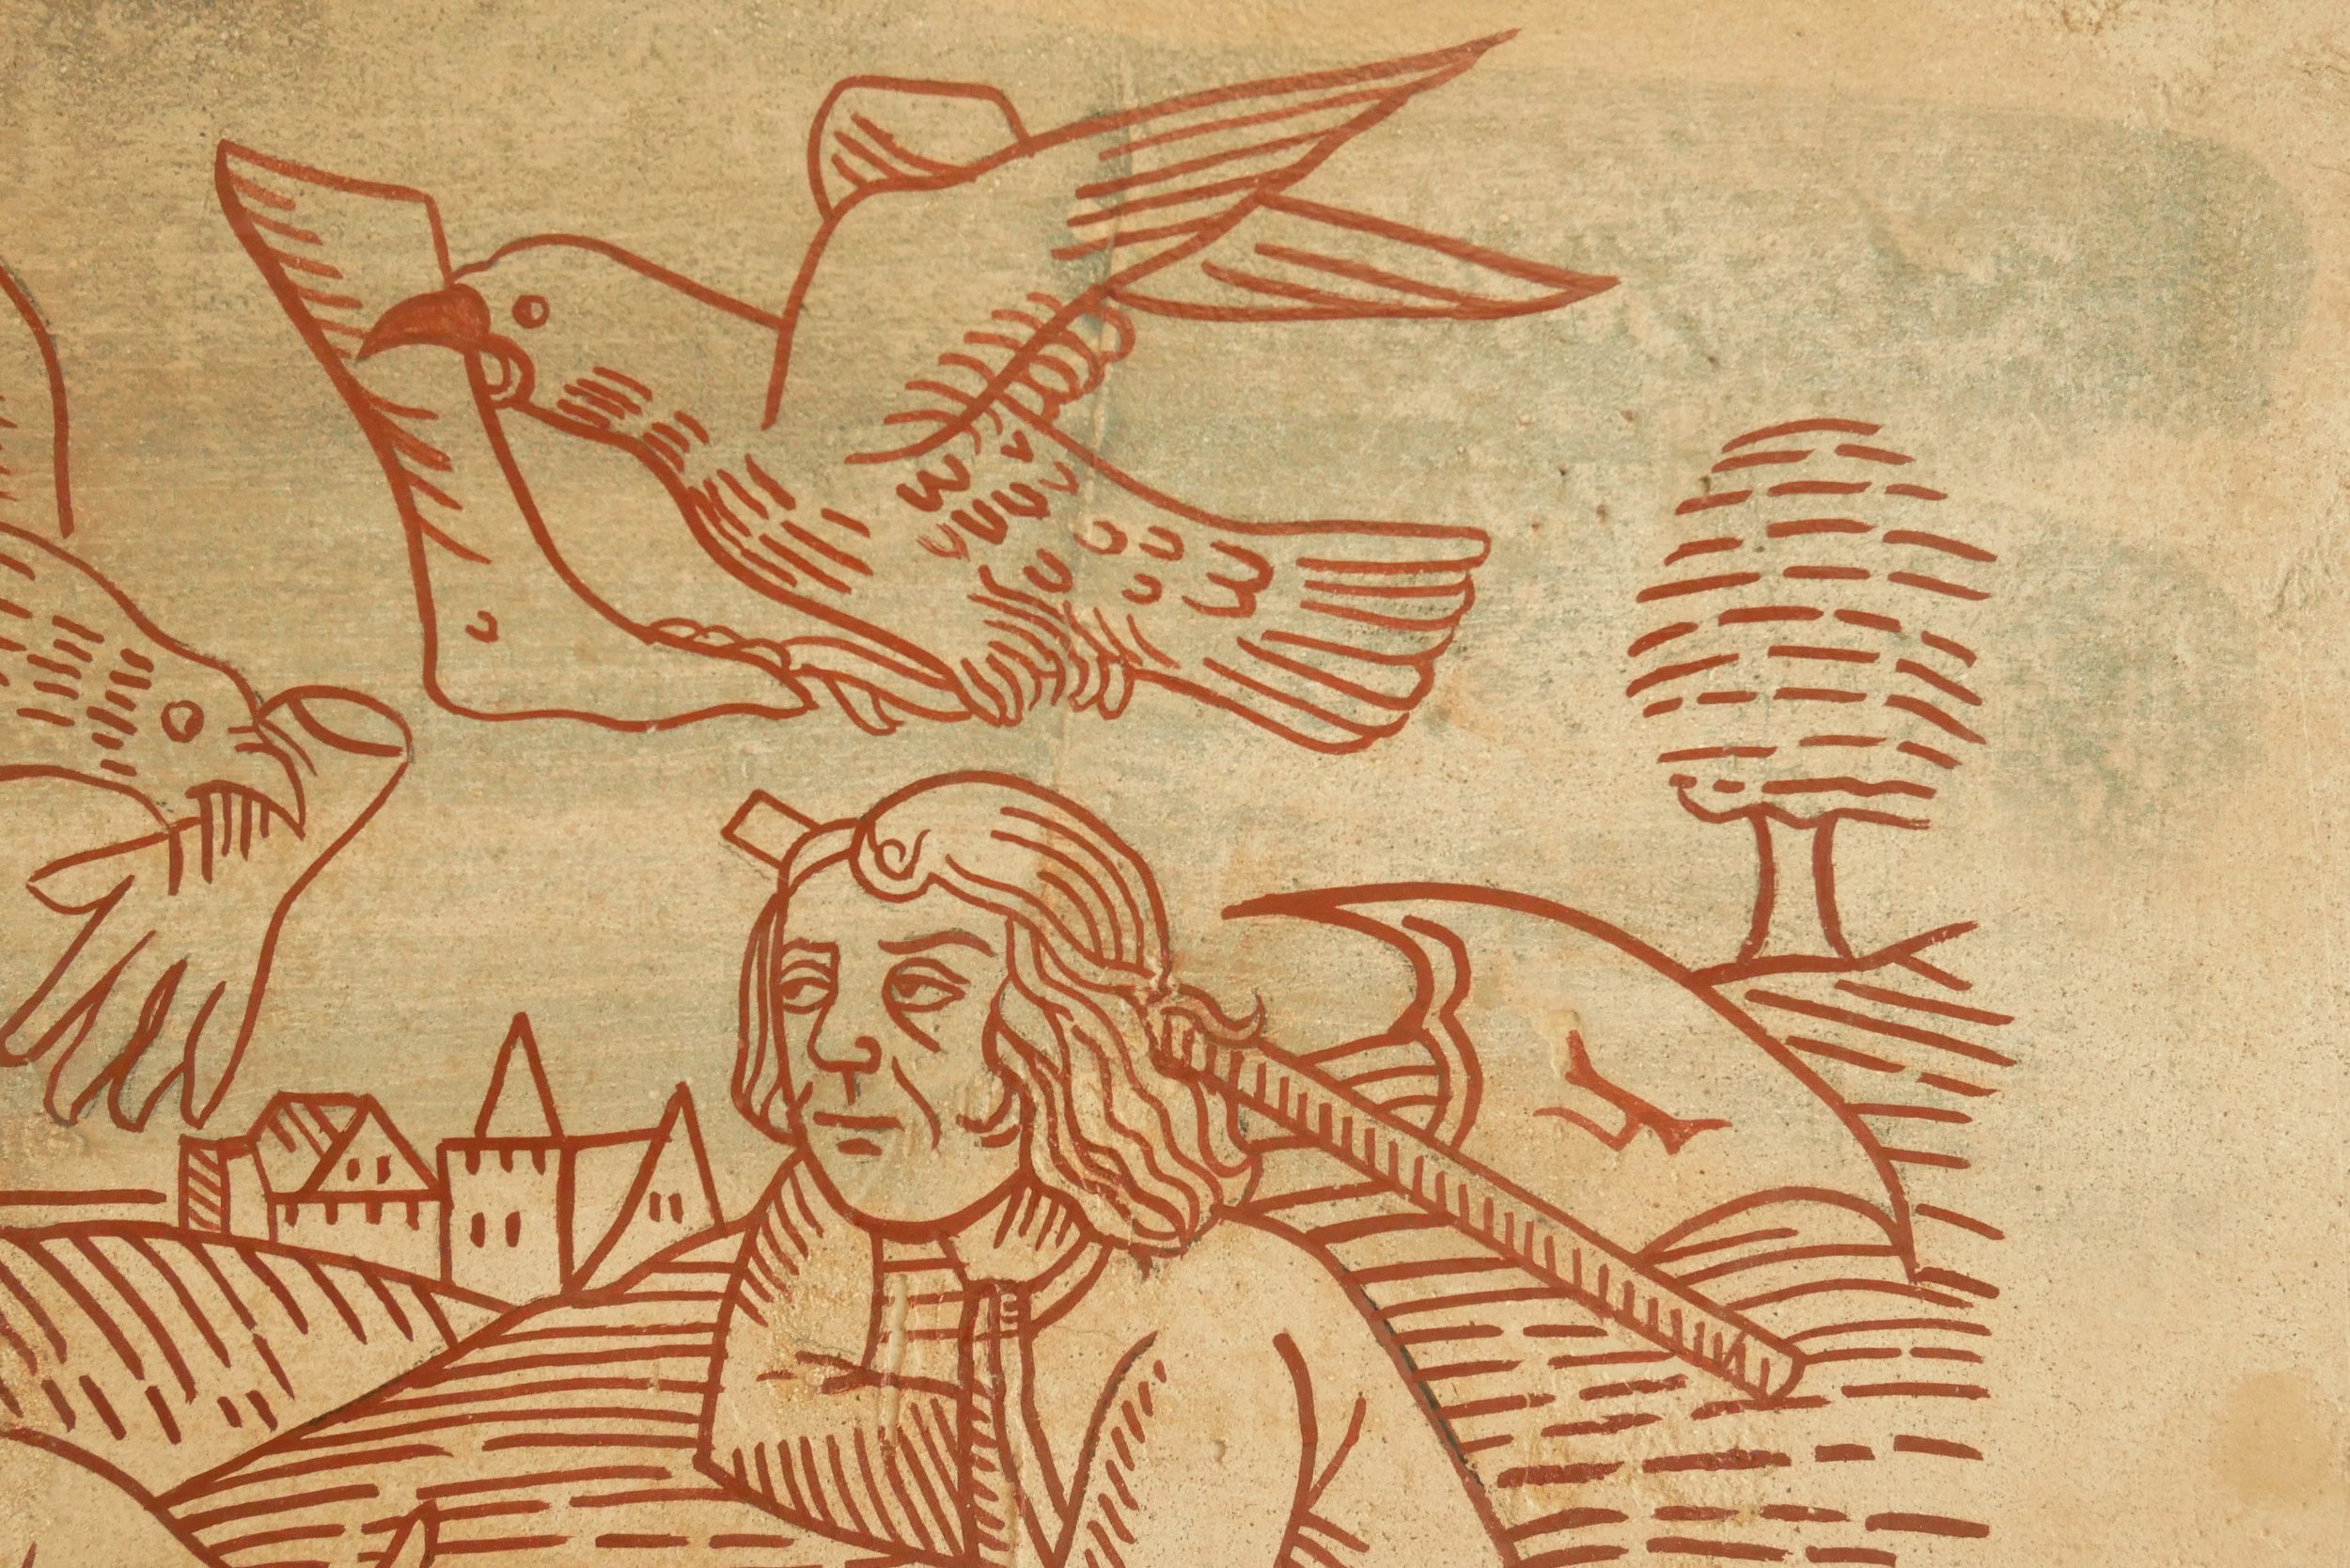 The Birds Quickly Forgot the War (detail)